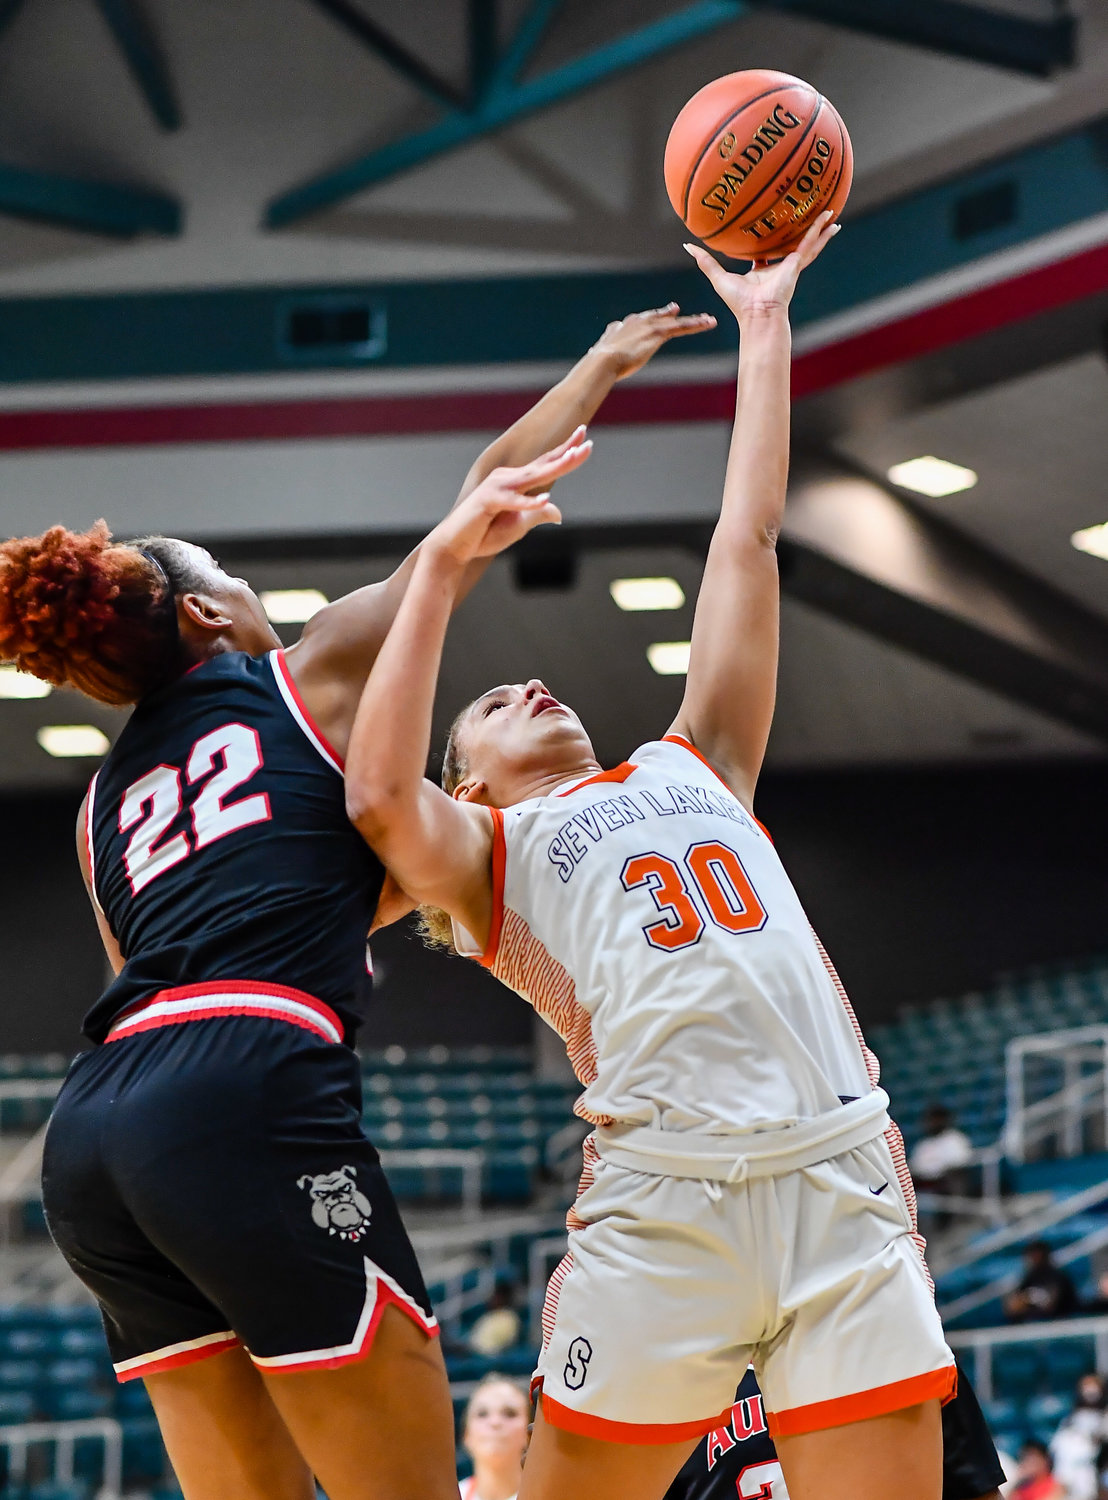 Katy Tx. Feb 22, 2022:   Seven Lakes Justice Carlton #30 avoids the block by Fort Bend Austins Gabrielle Johnson #22 scoring for the Spartans during the Regional Quarterfinal playoff game, Seven Lakes vs Fort Bend Austin at the Merrell Center. (Photo by Mark Goodman / Katy Times)